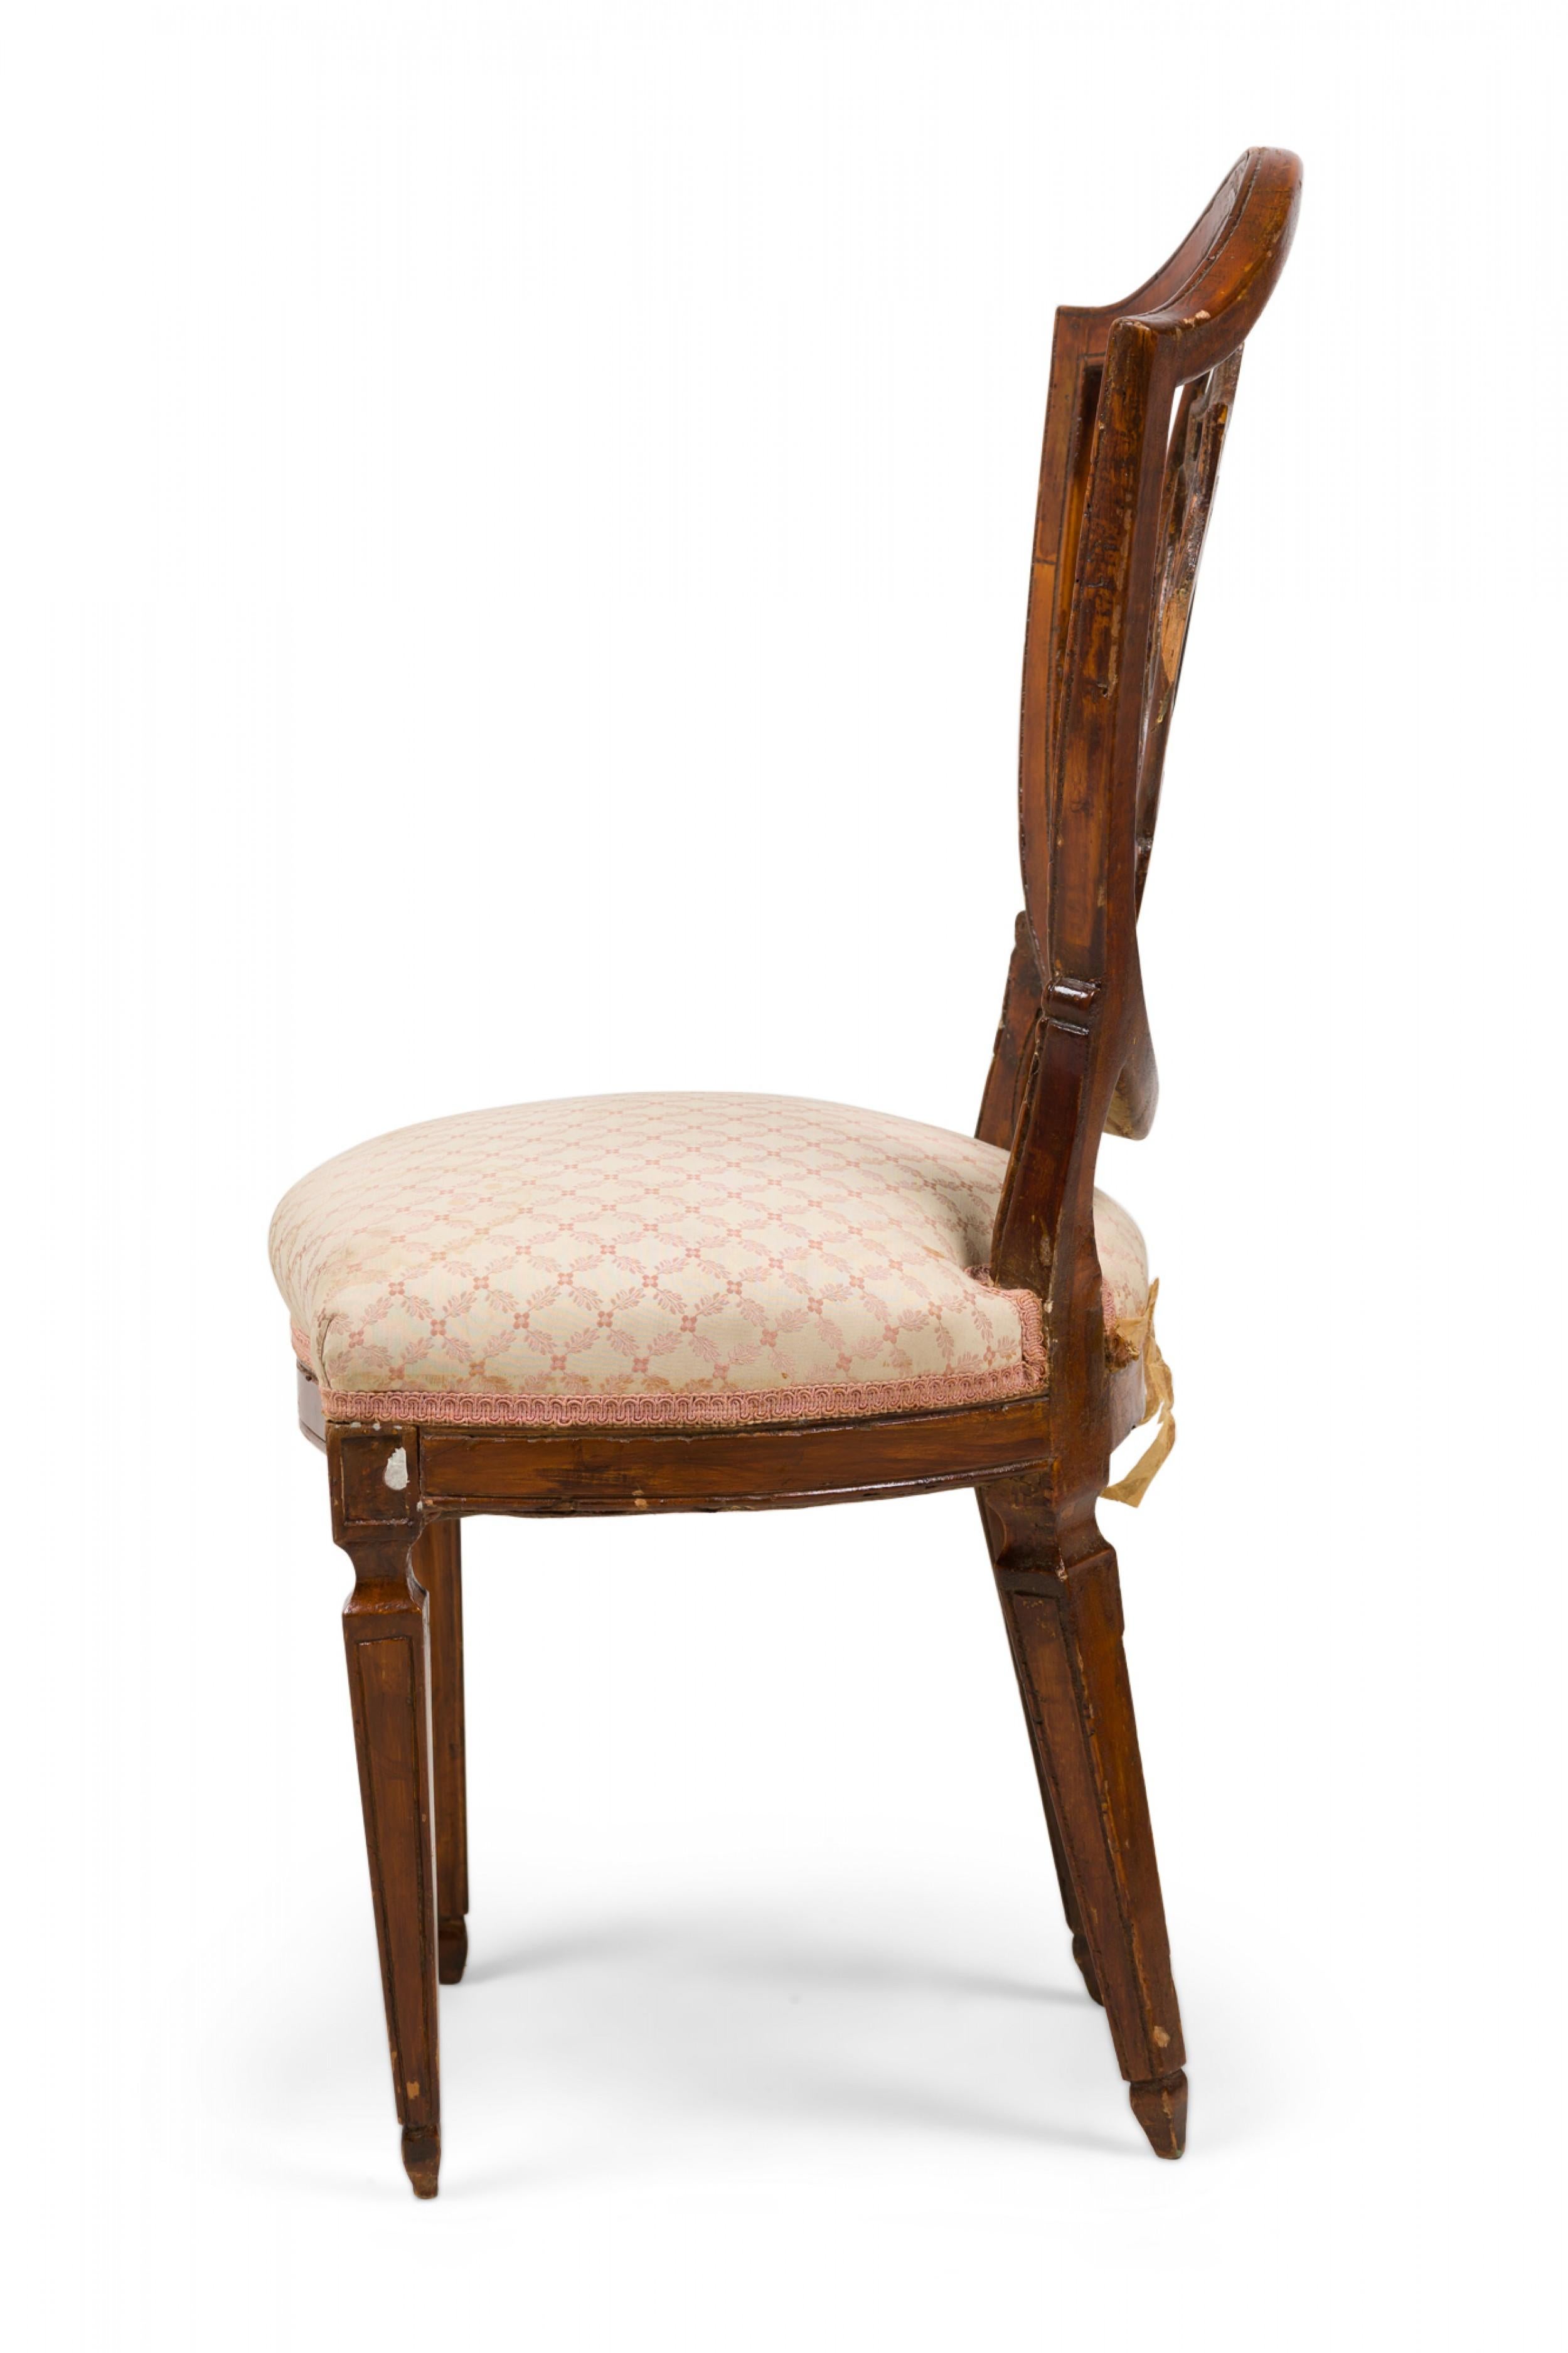 Neoclassical Italian Neoclassic Shield Back Dining/Side Chair W/ Floral Beige Upholstery For Sale